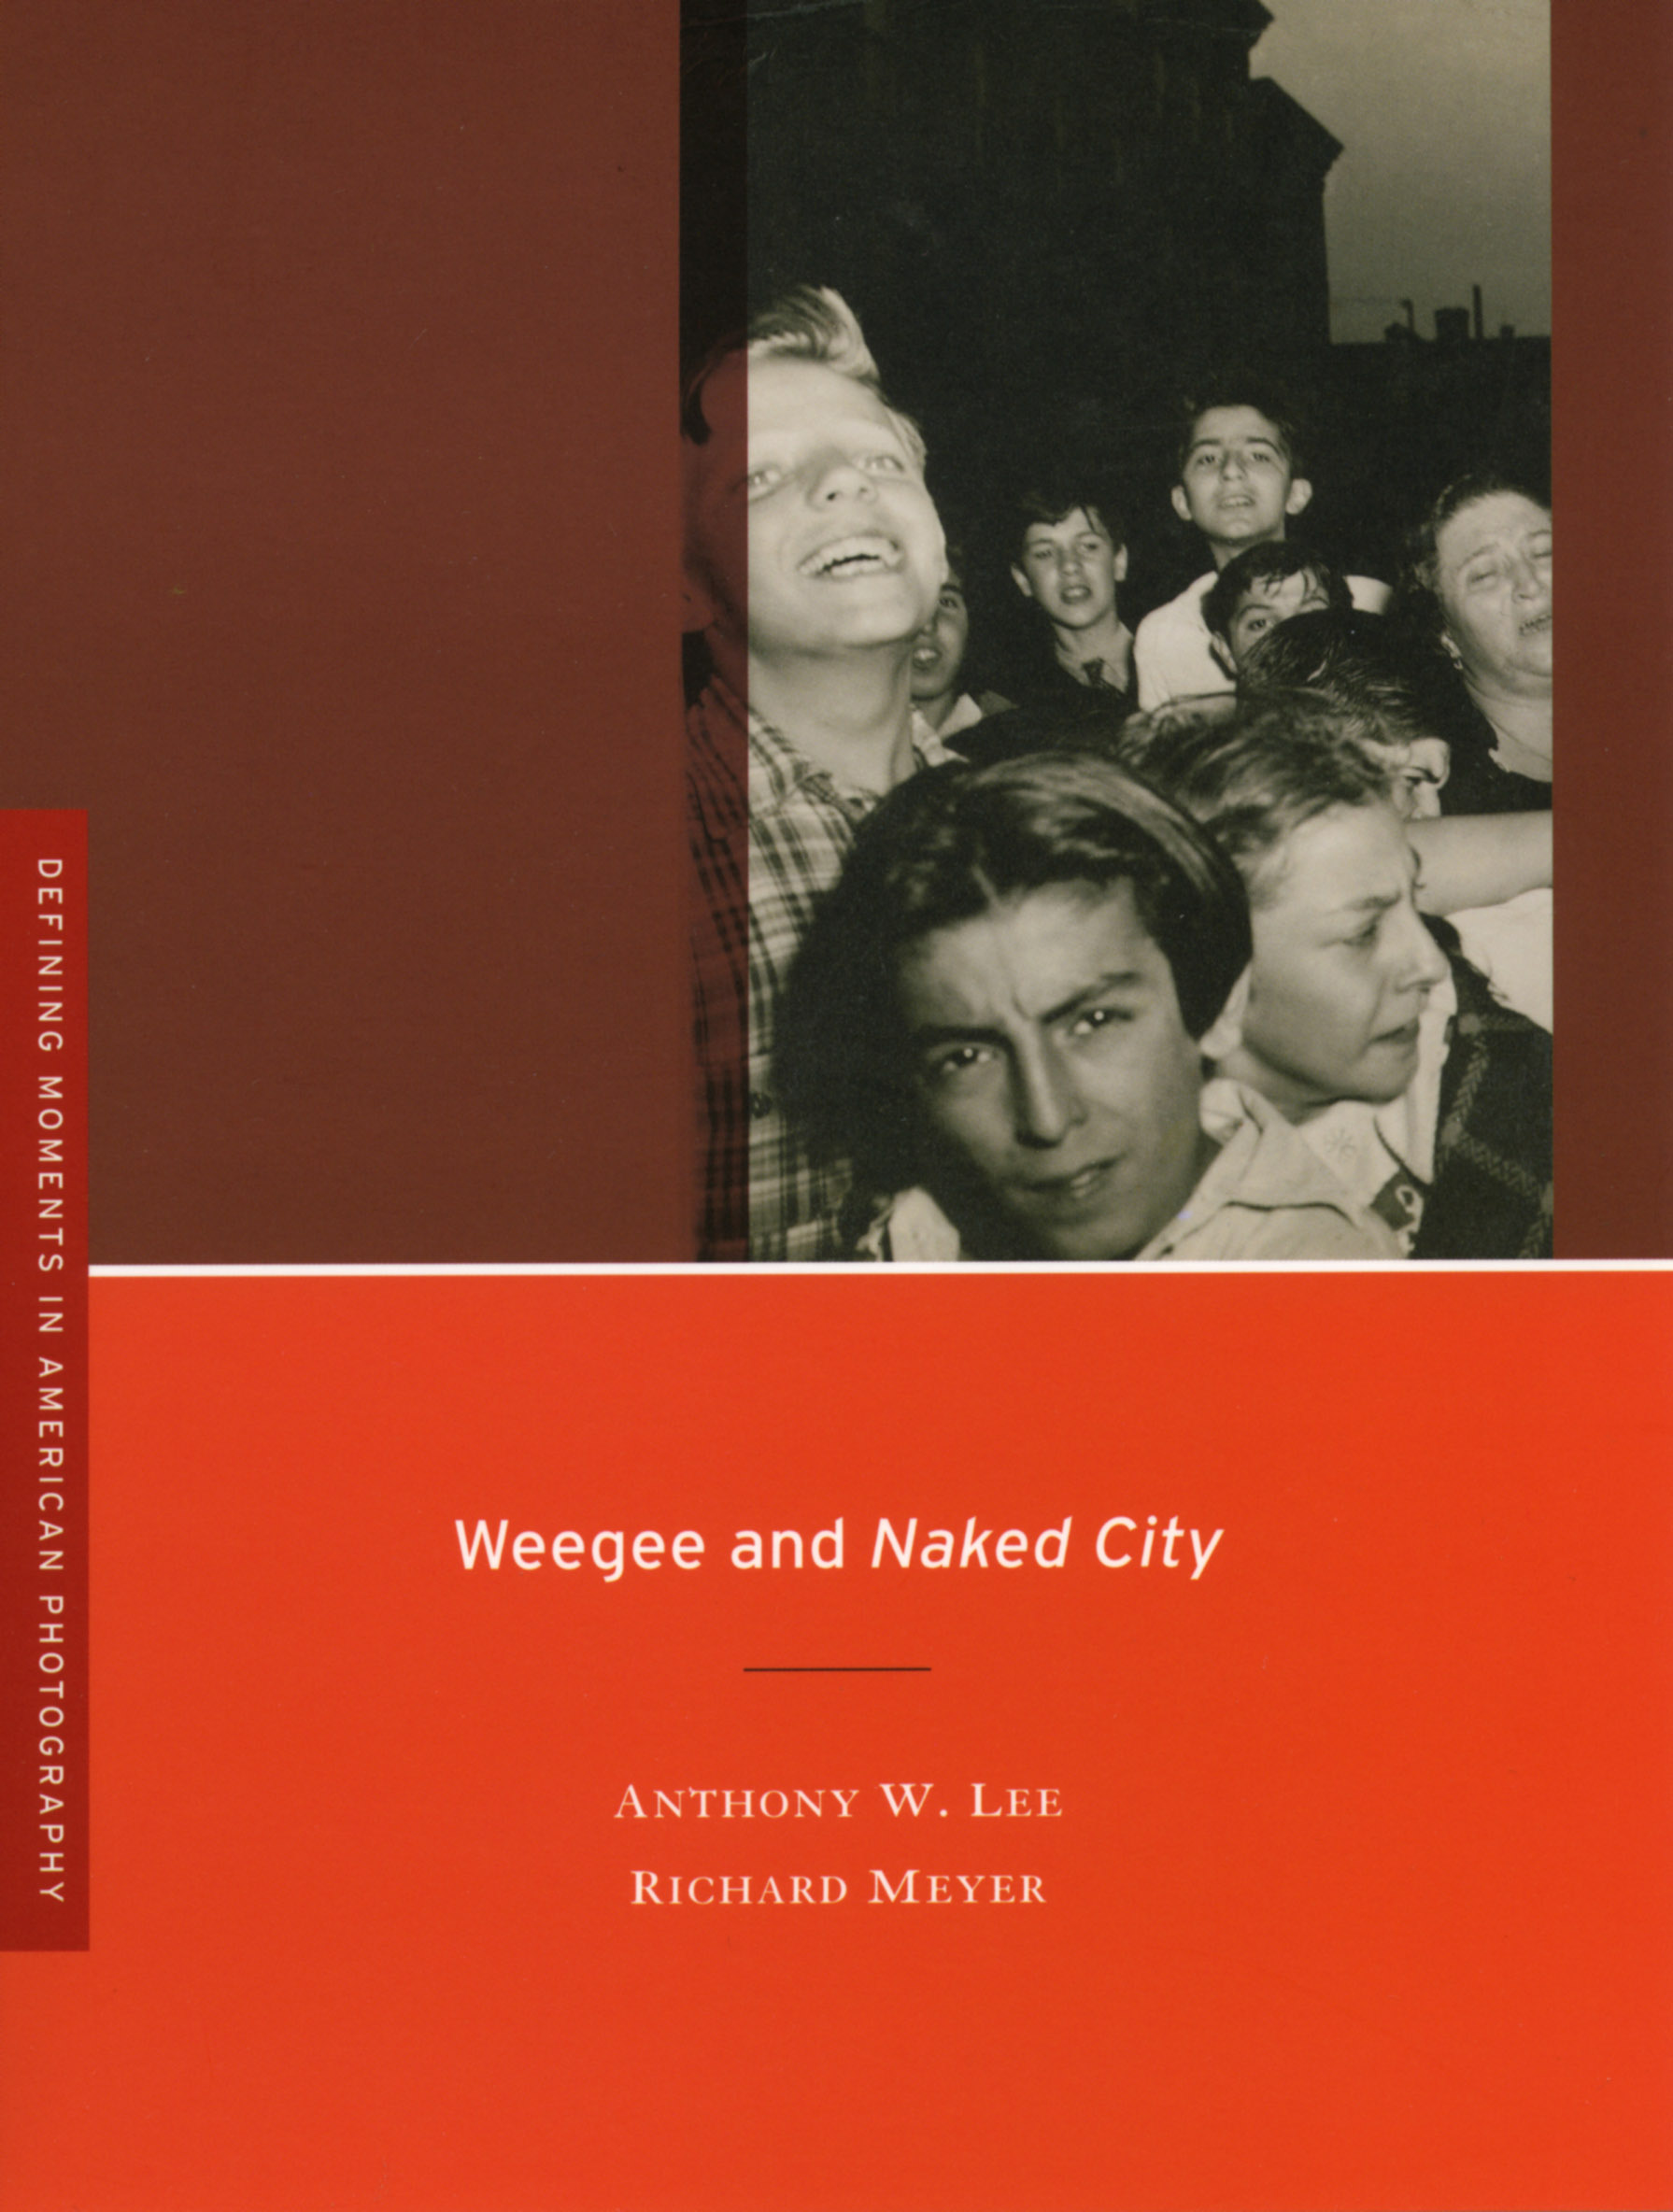 DMAP_weegee-and-naked-city.jpg